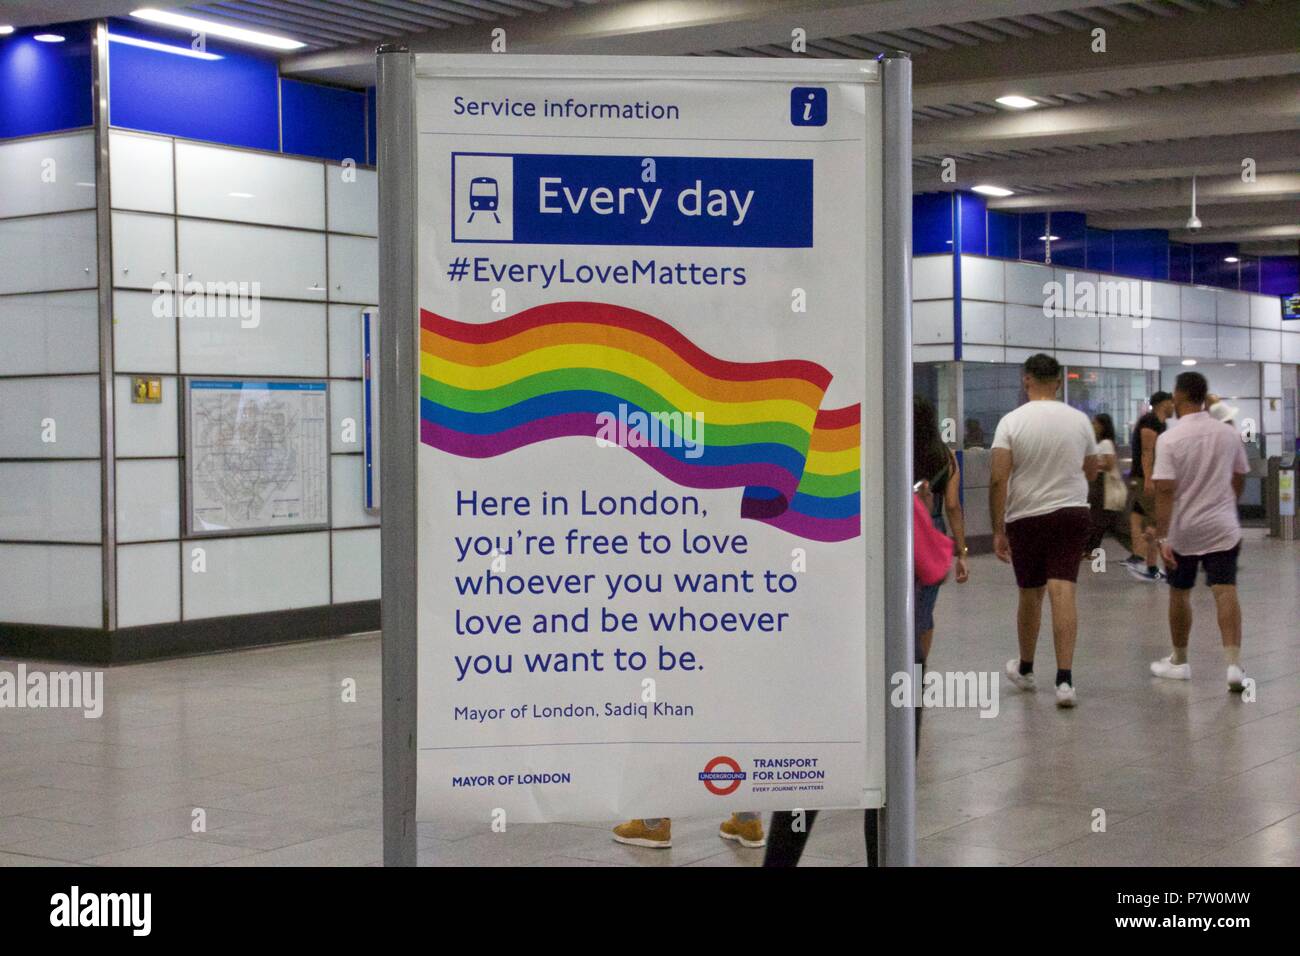 London, UK. 7th July 2018. Pride celebrations in London. A sign inside Tottenham Court Road station that says 'Here in London, you're free to love whoever you want to love and be whoever you want to be #EveryLoveMatters', celebrating Pride in London 2018. Credit: Dimple Patel/Alamy Live News Stock Photo